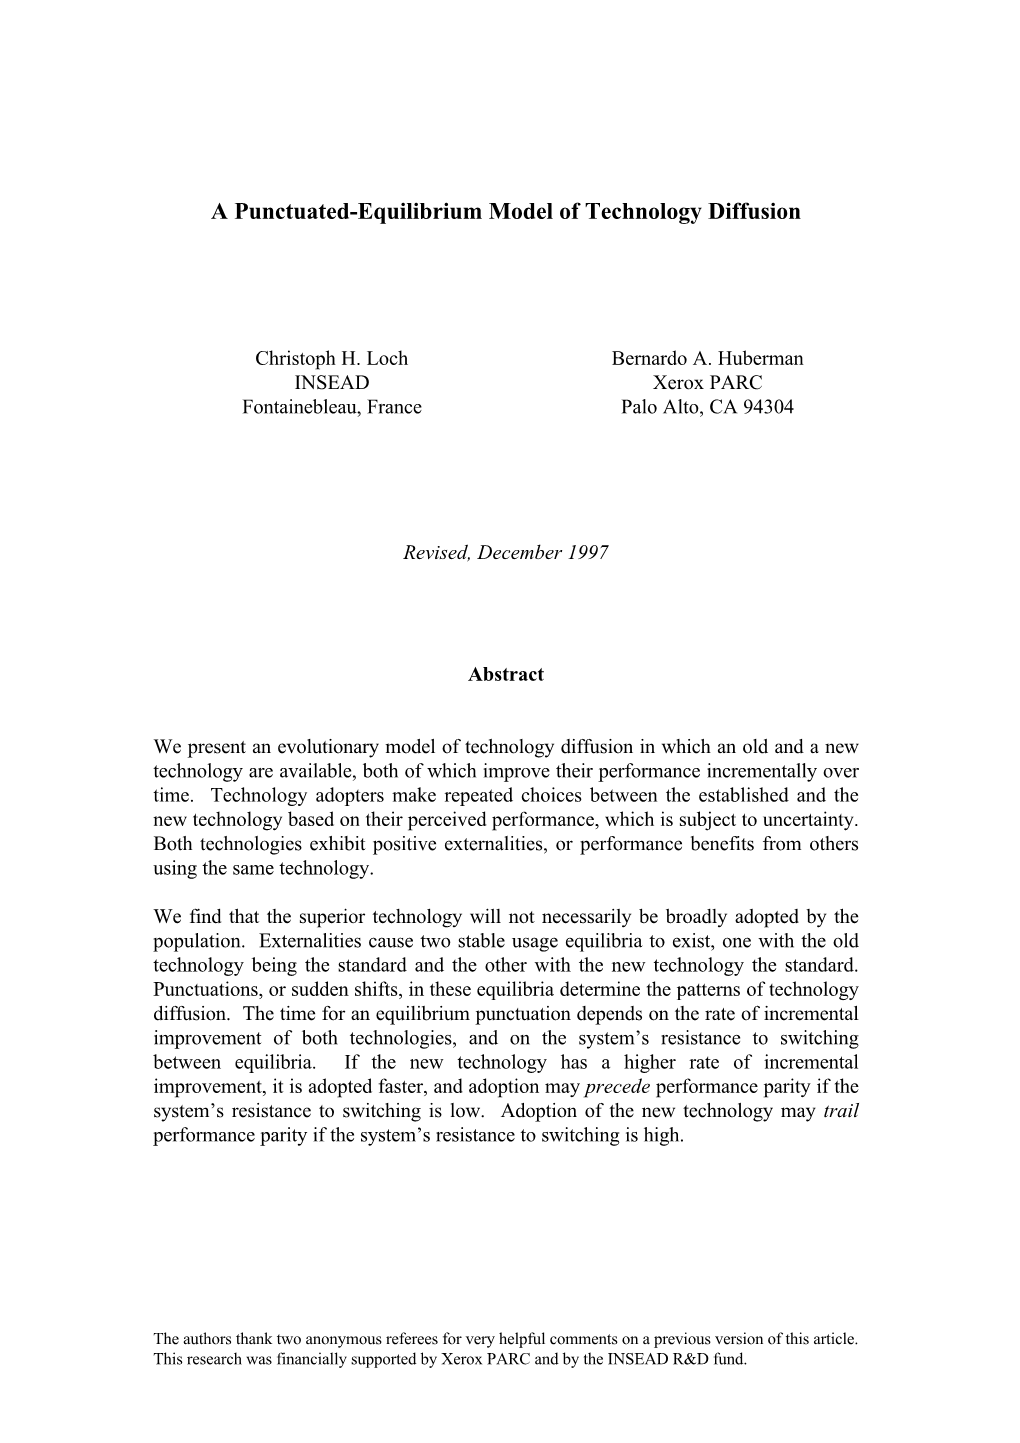 A Punctuated-Equilibrium Model of Technology Diffusion